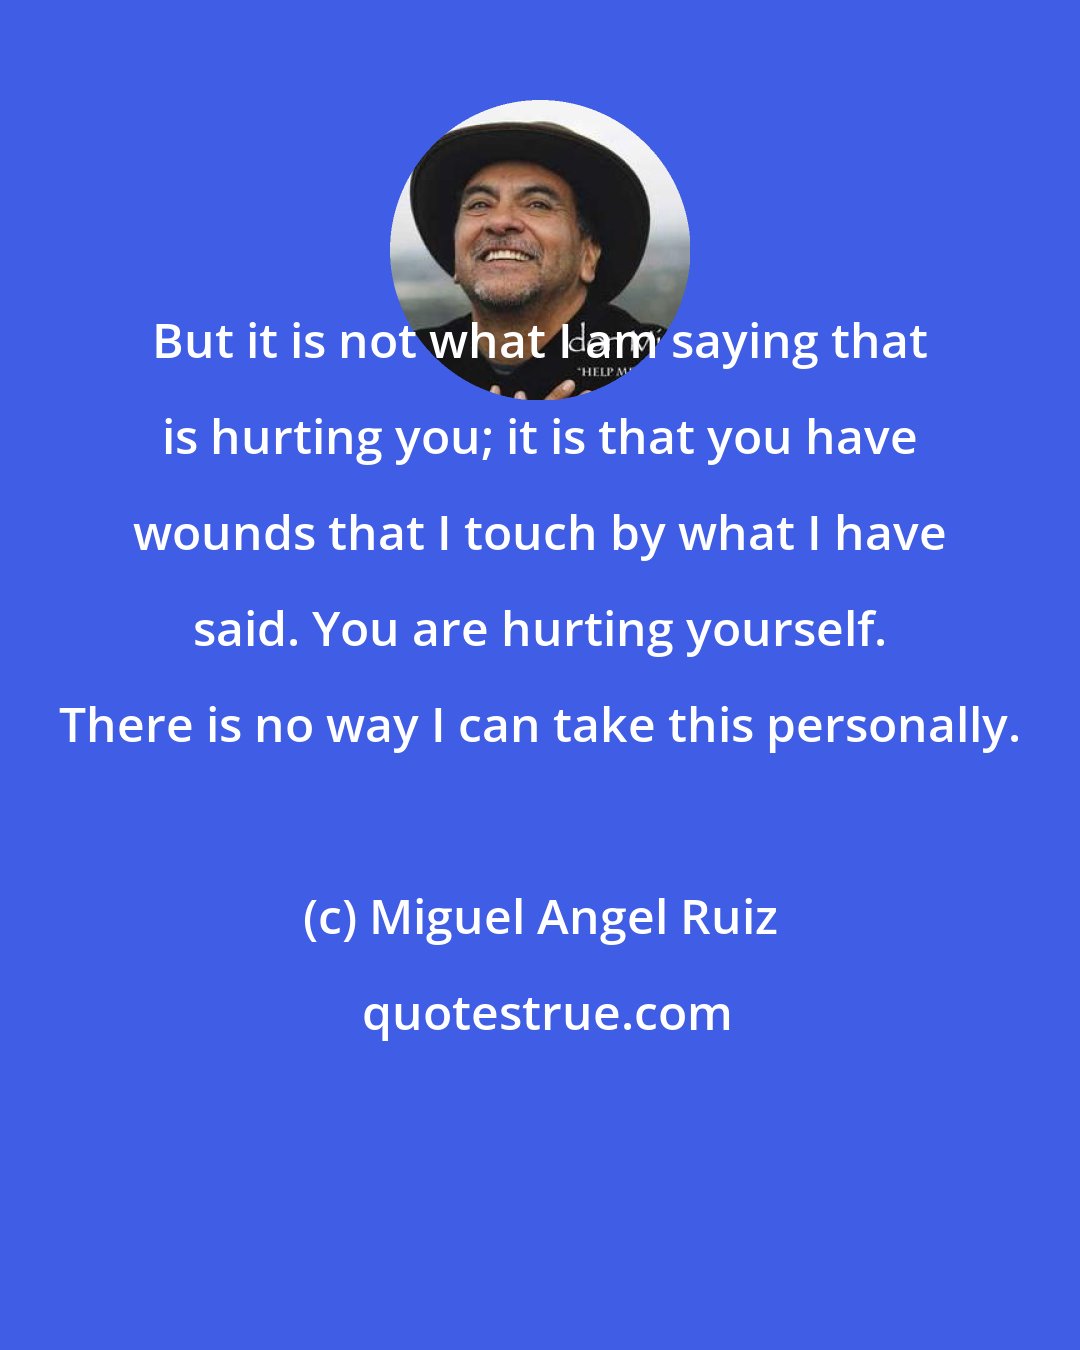 Miguel Angel Ruiz: But it is not what I am saying that is hurting you; it is that you have wounds that I touch by what I have said. You are hurting yourself. There is no way I can take this personally.